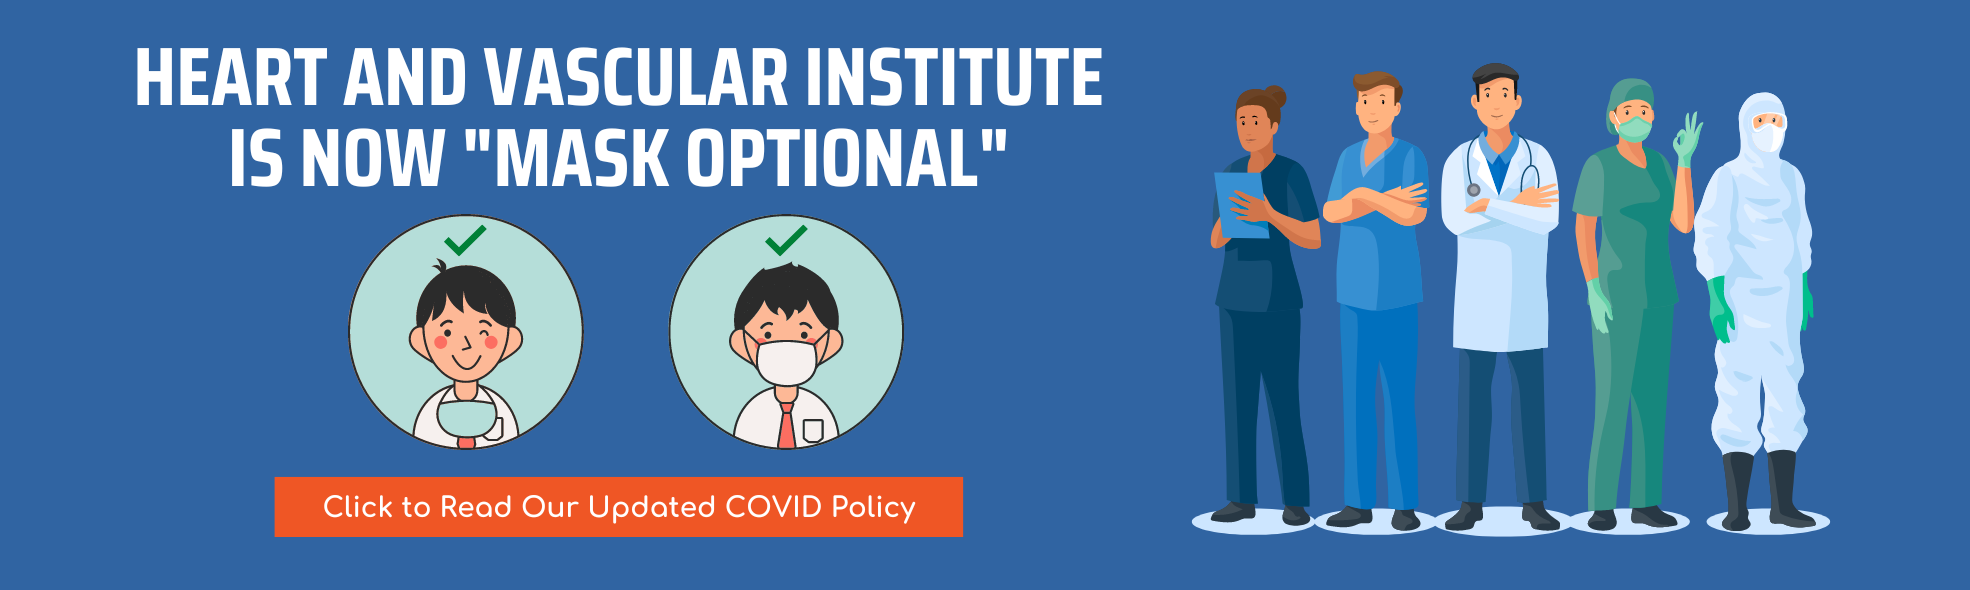 HVI is Now Mask Optional - Click to Read New COVID Policy